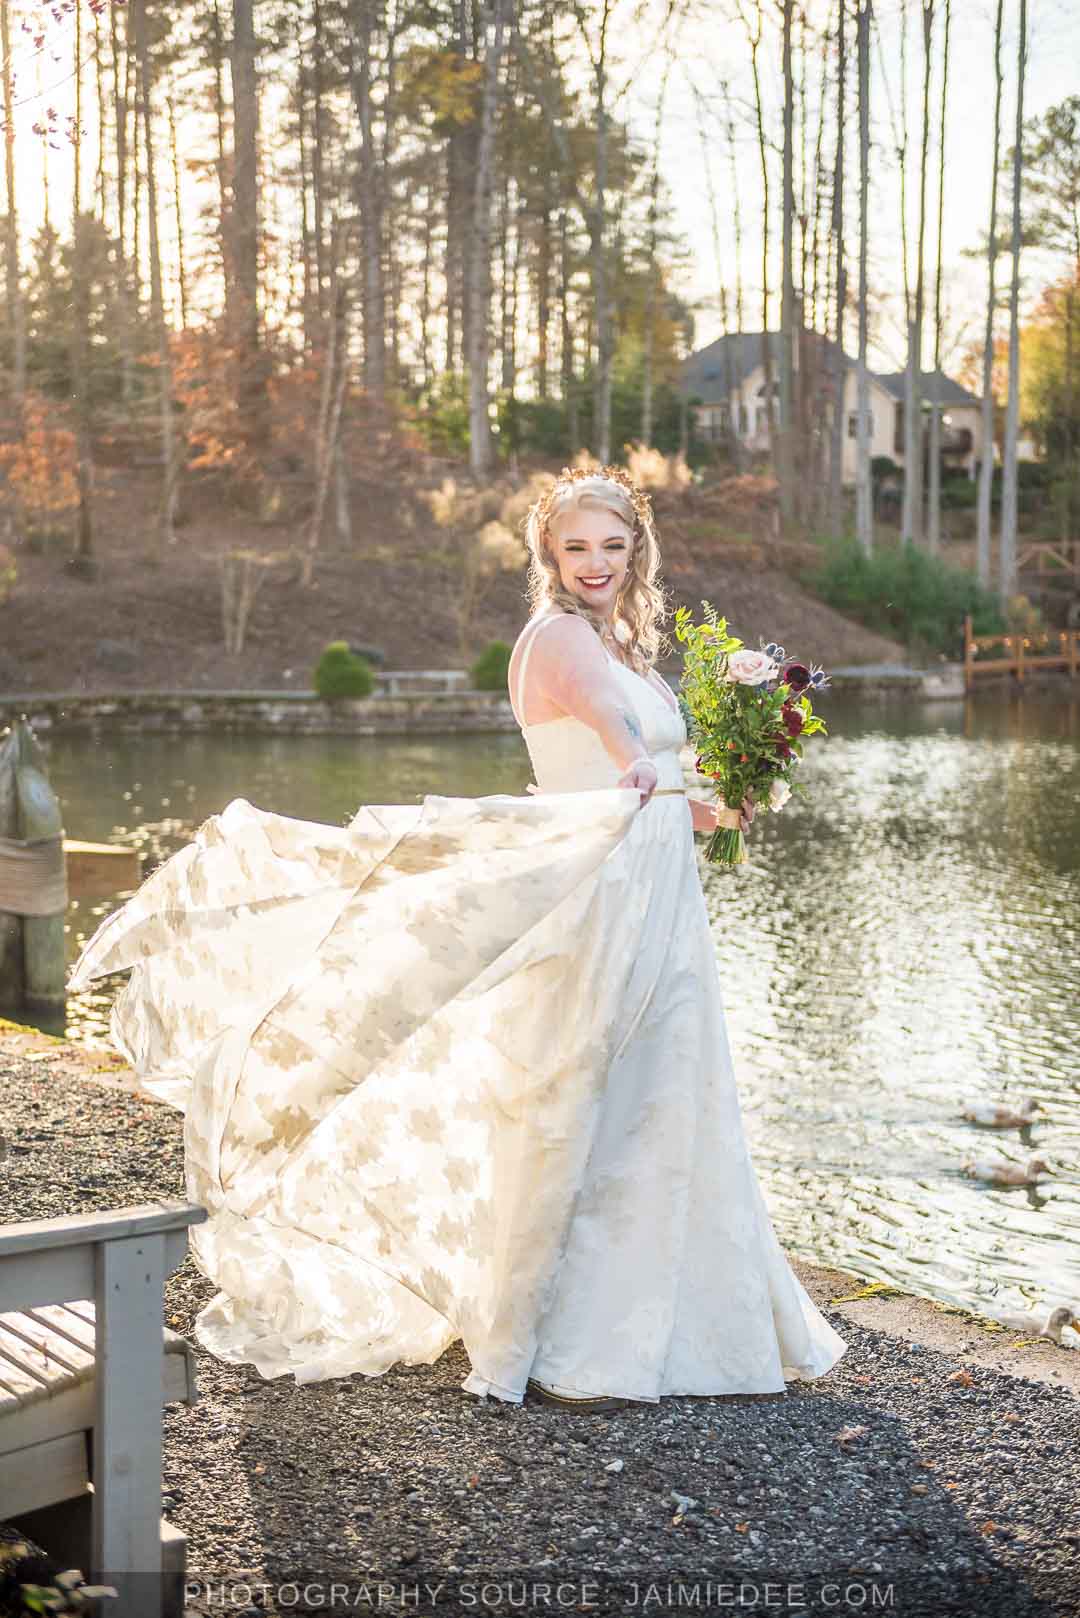 Rocky's Lake Estate Wedding Venue - Bridal Portraits - bride on her wedding day holding bouquet of flowers - full body - tossing the dress